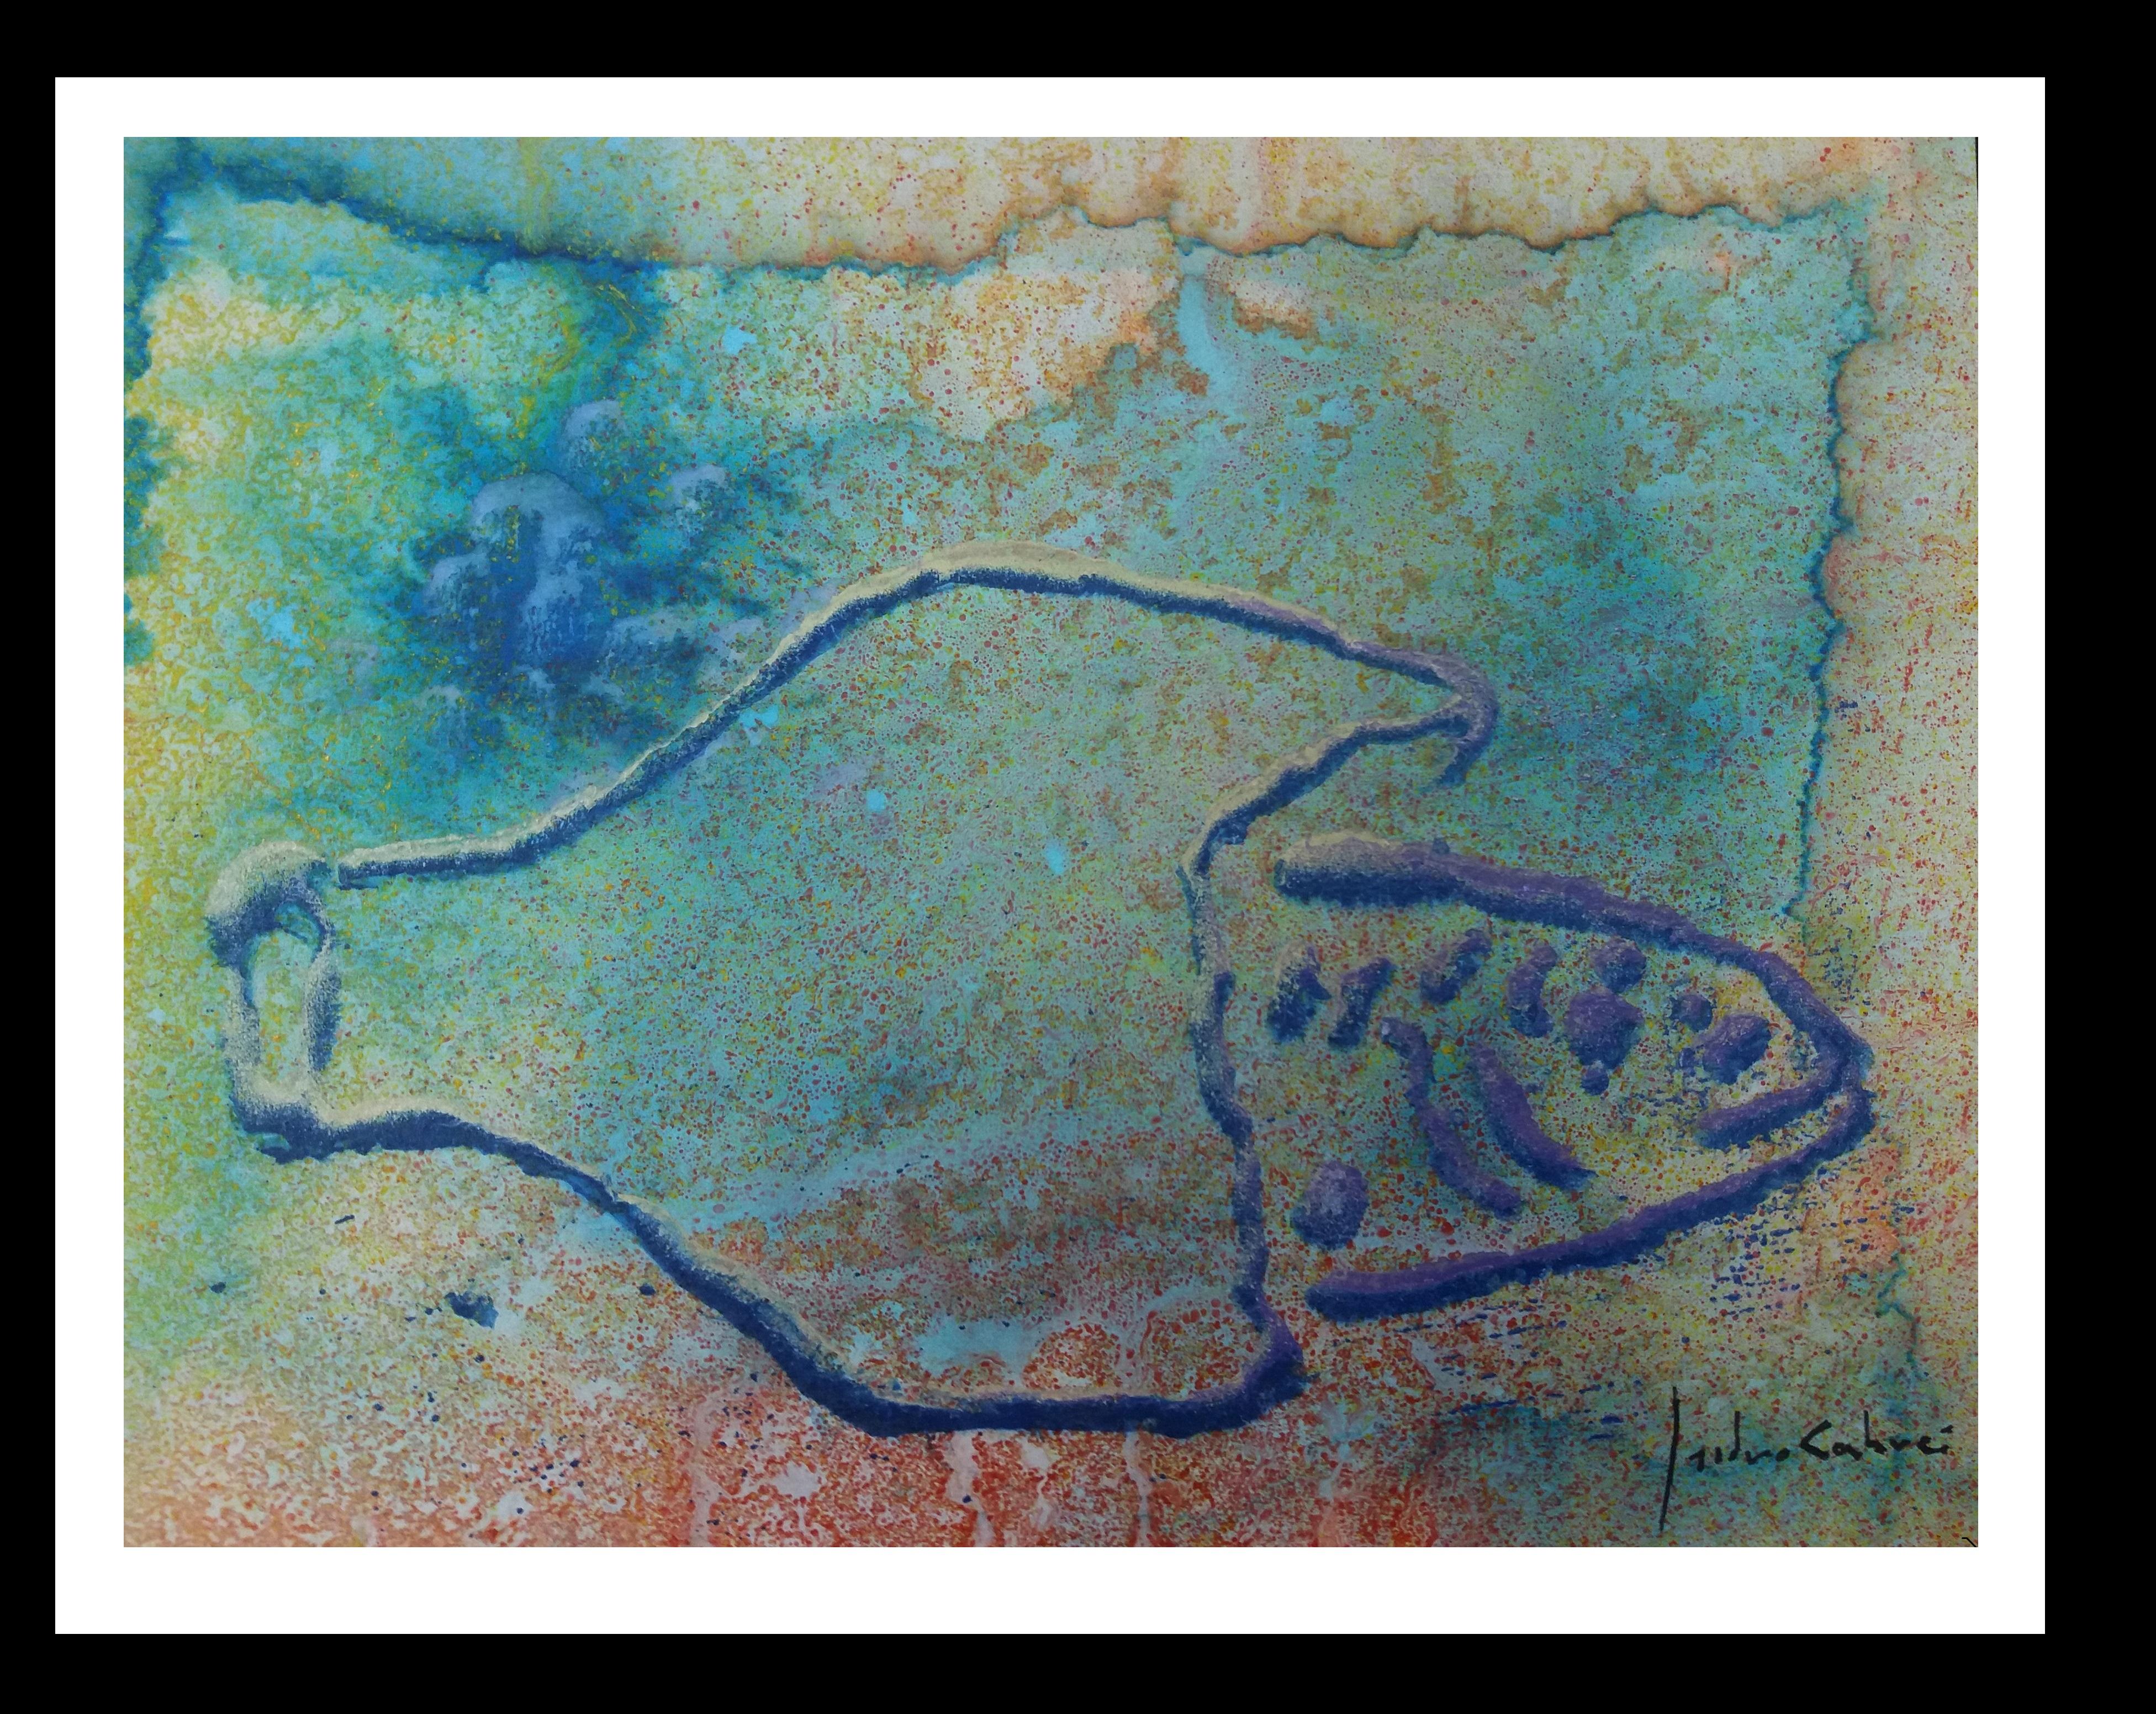  Cahue    drops effect. fish original abstract acrylic paper painting - Painting by Isidro Cahue